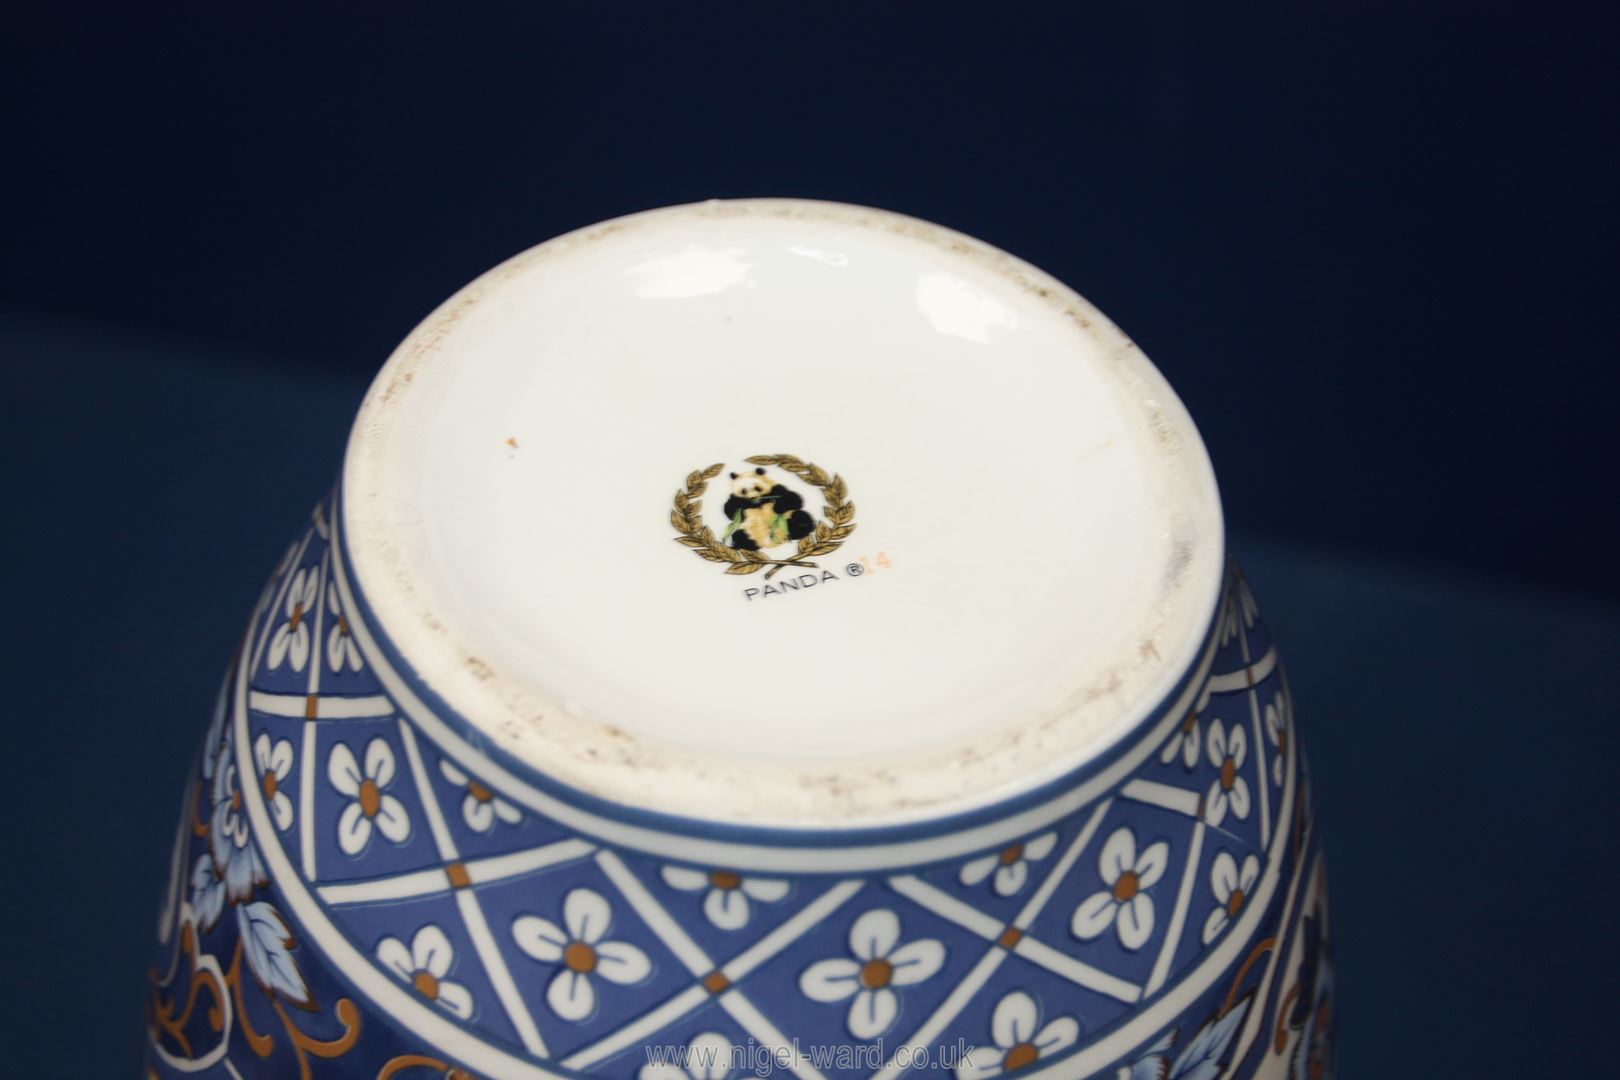 An oriental style Vase with panels of blue and gold Peacocks between floral detail on a white - Image 2 of 2